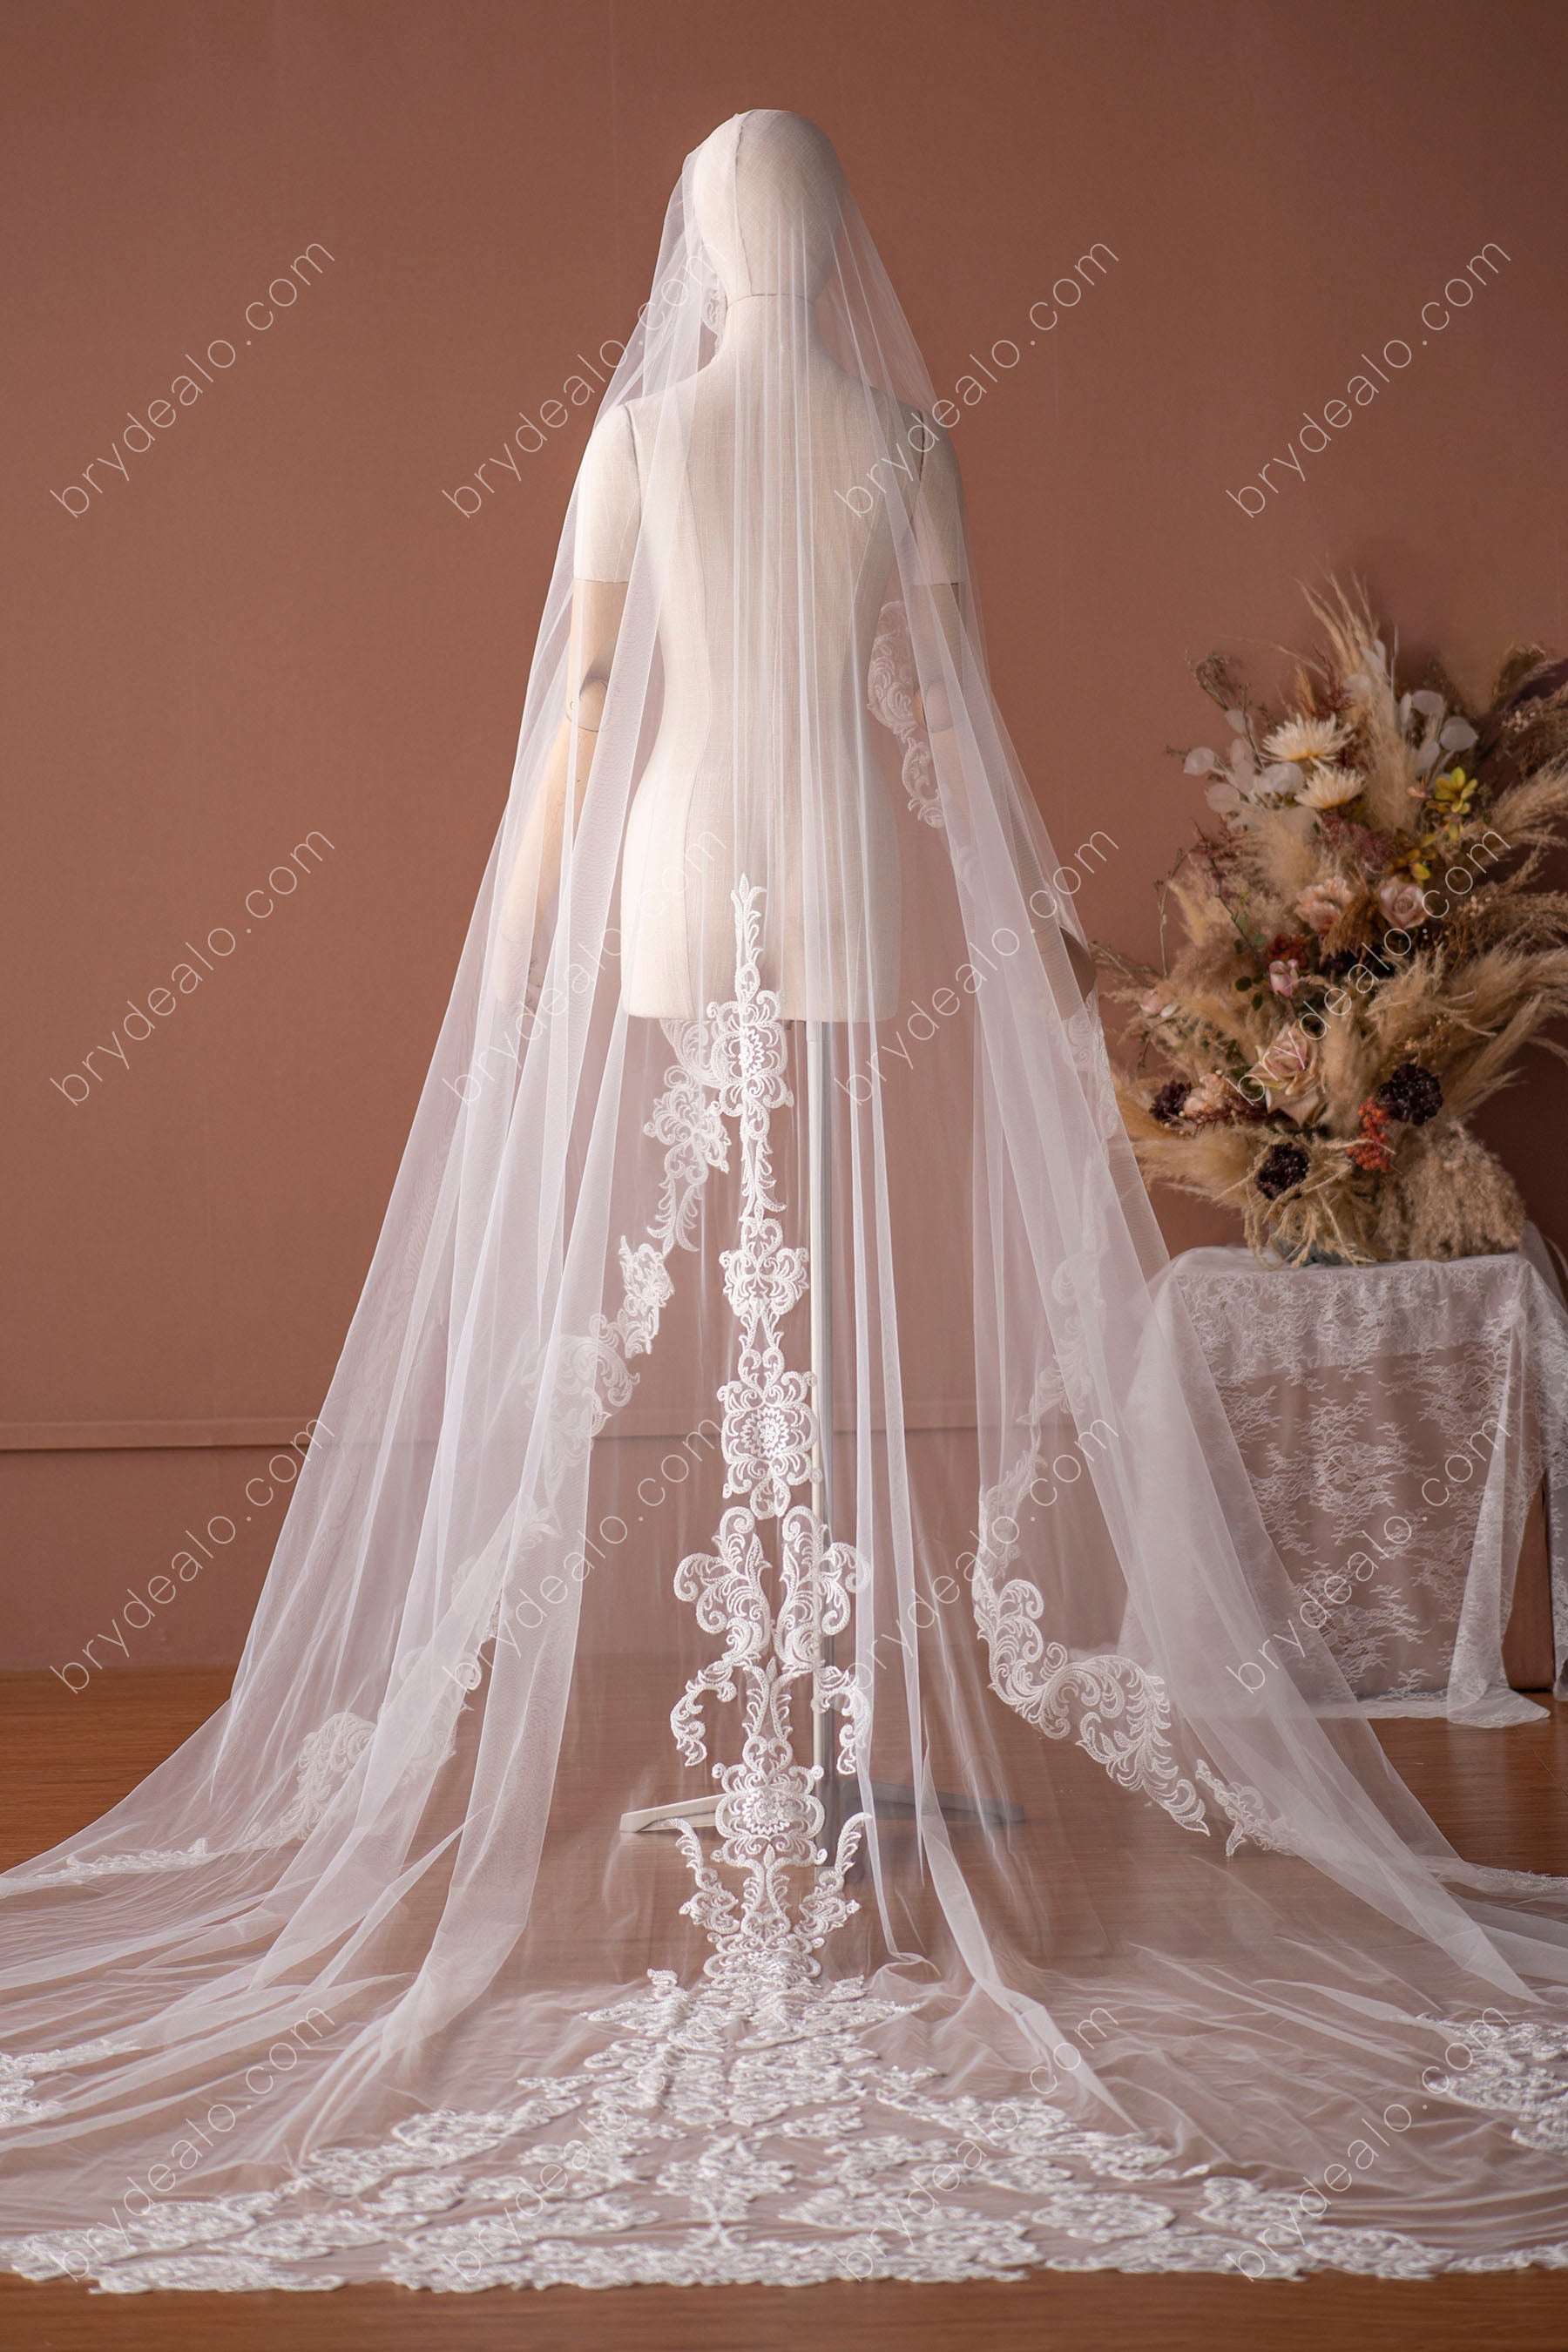 Brydealo Factory Two-Tier Cathedral Length Ruffled Bridal Veil